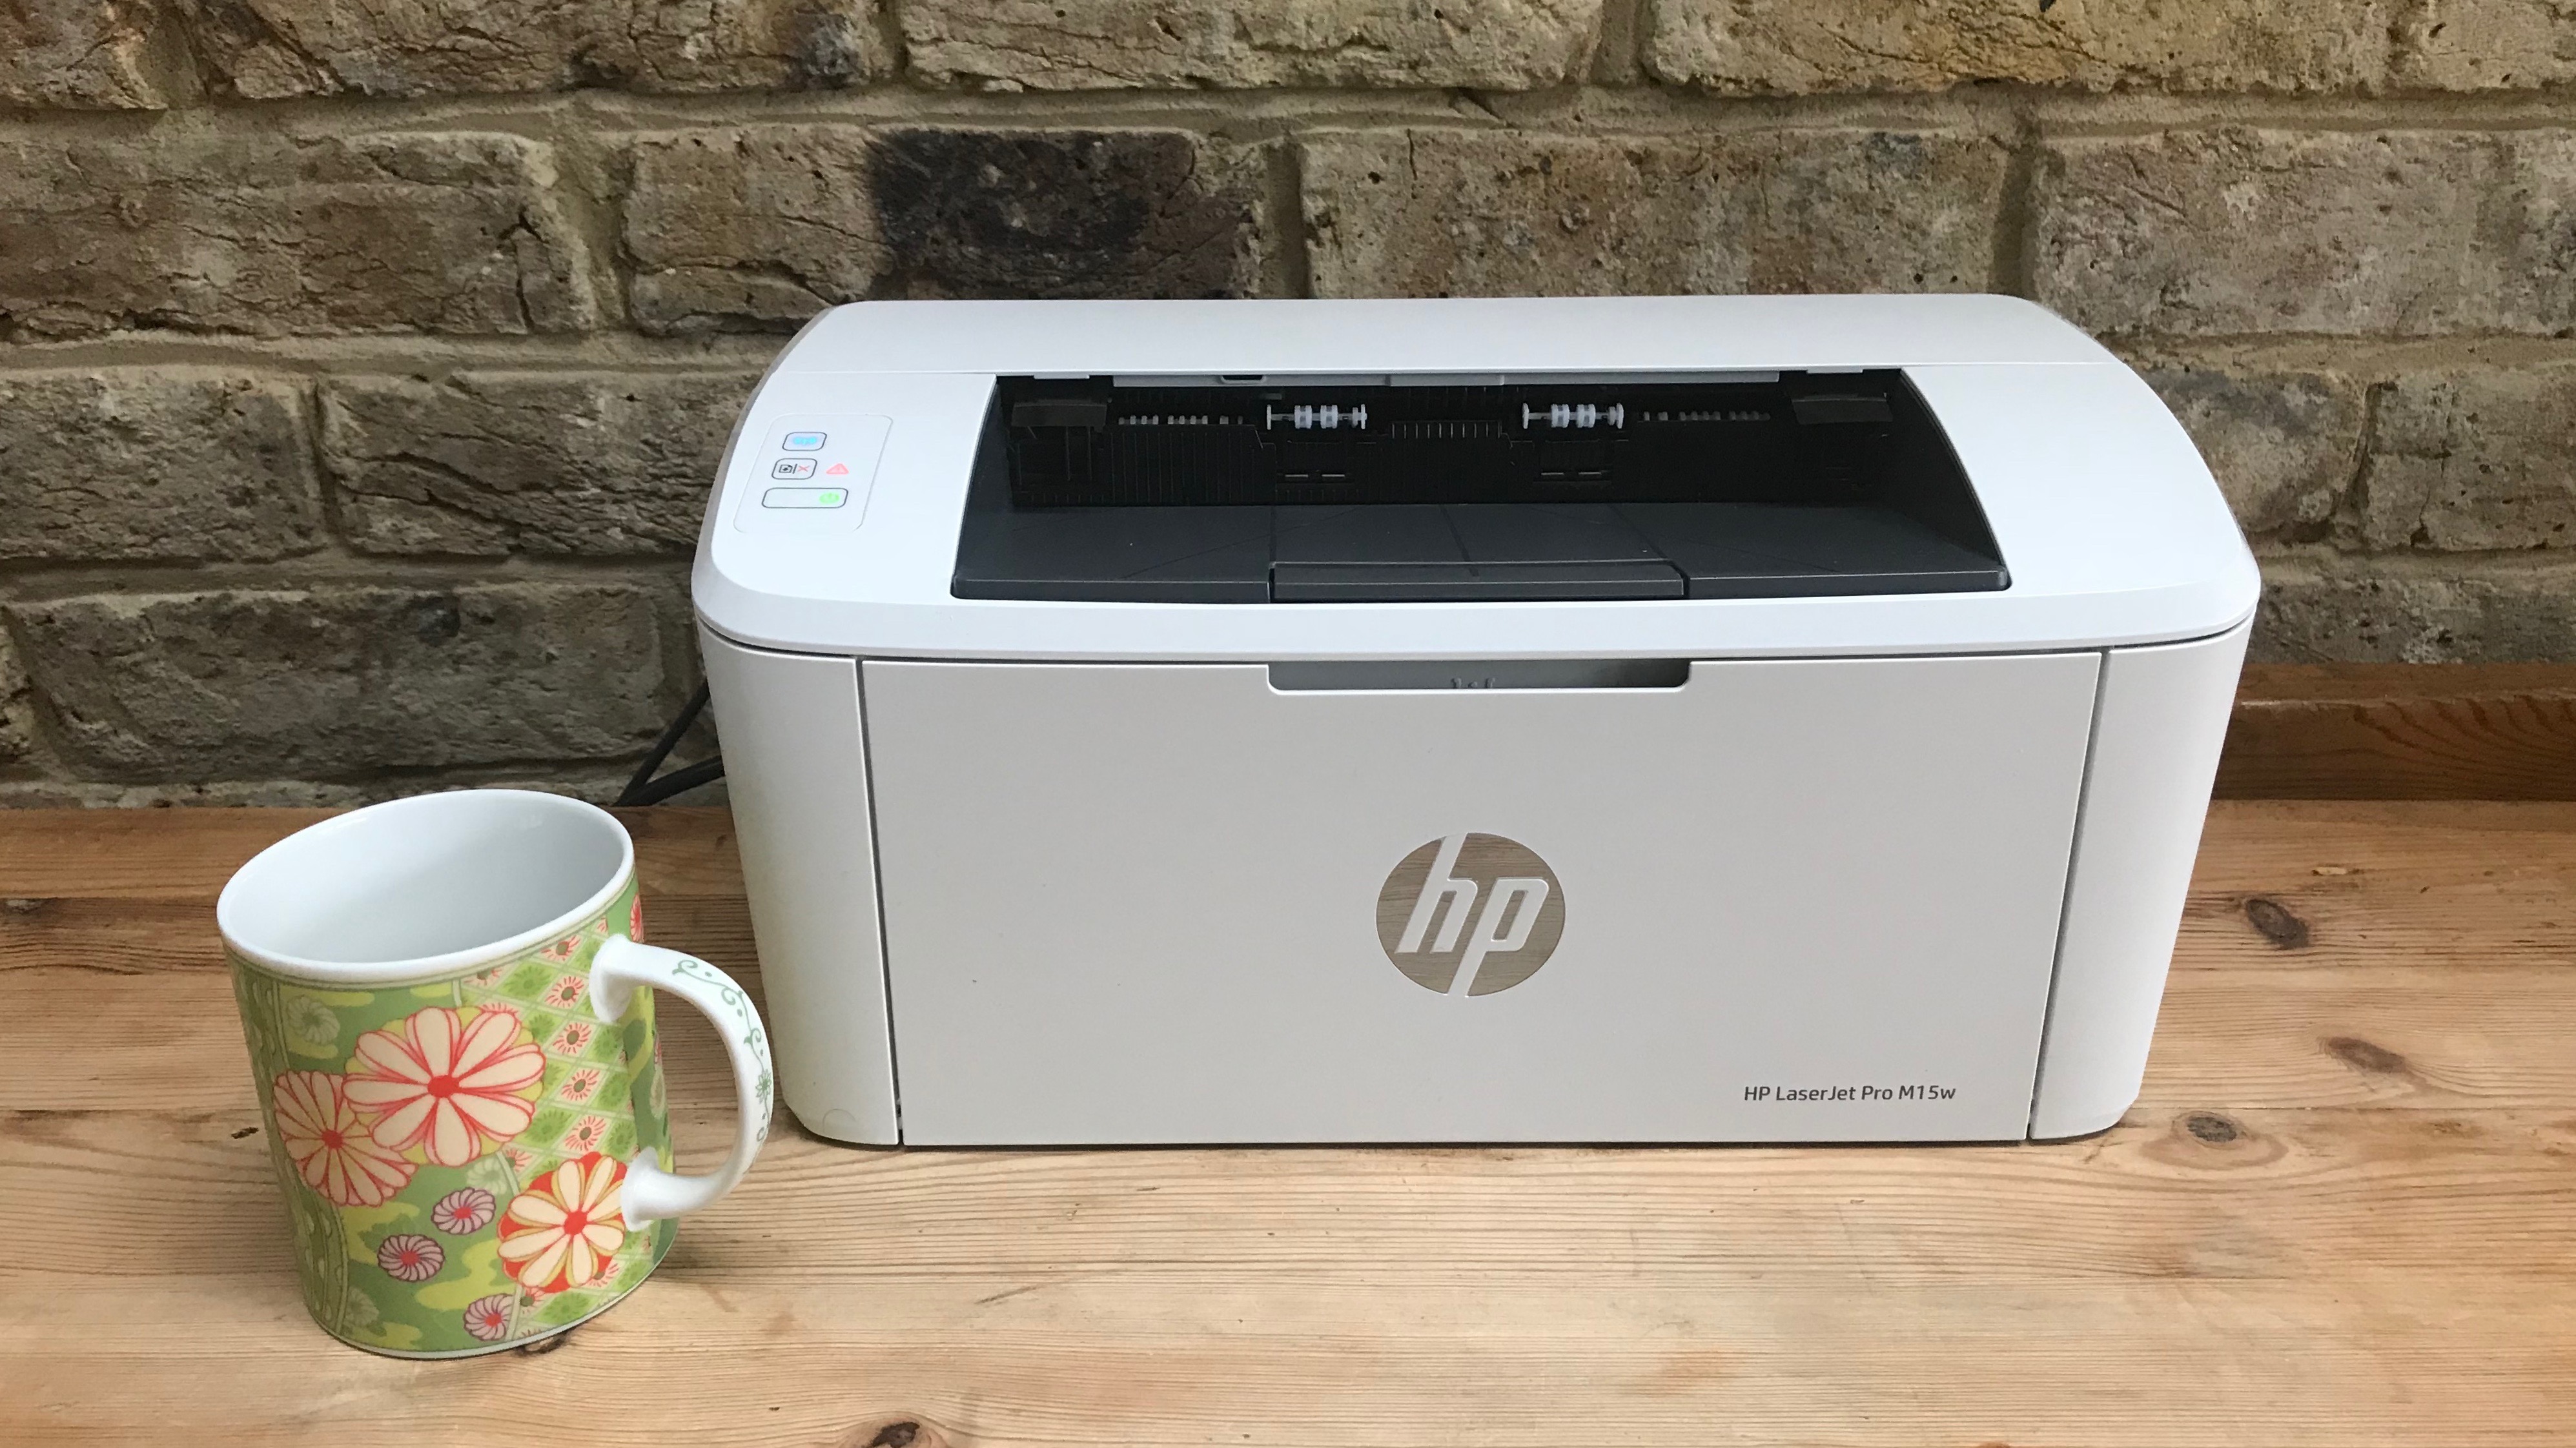 Best HP printers of 2021: Portable, laser, all-in-one, inkjet and more